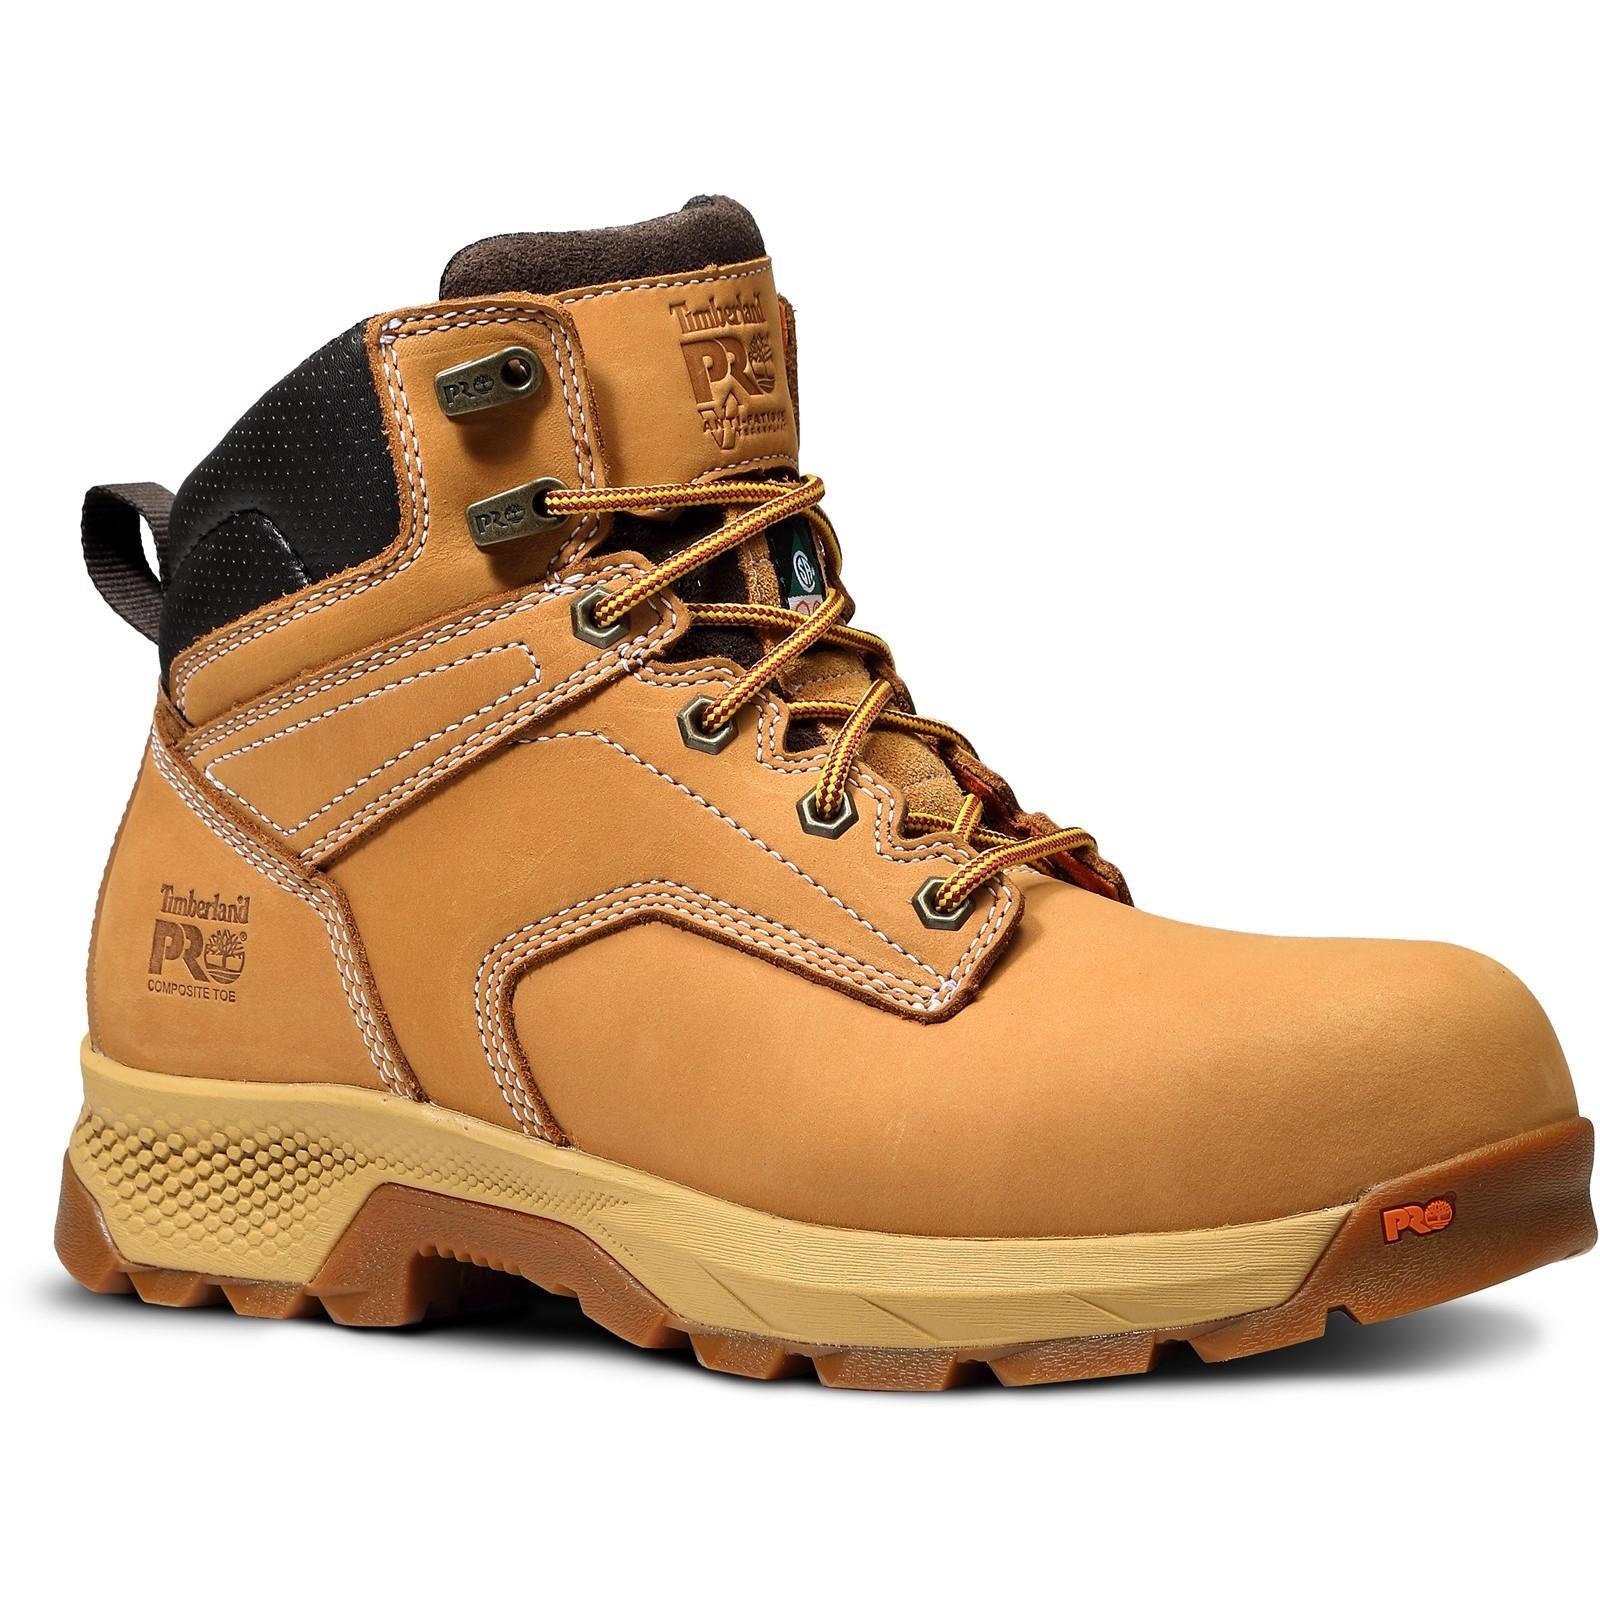 Timberland Pro Ladies Titan EV S7 wheat composite waterproof work safety boots